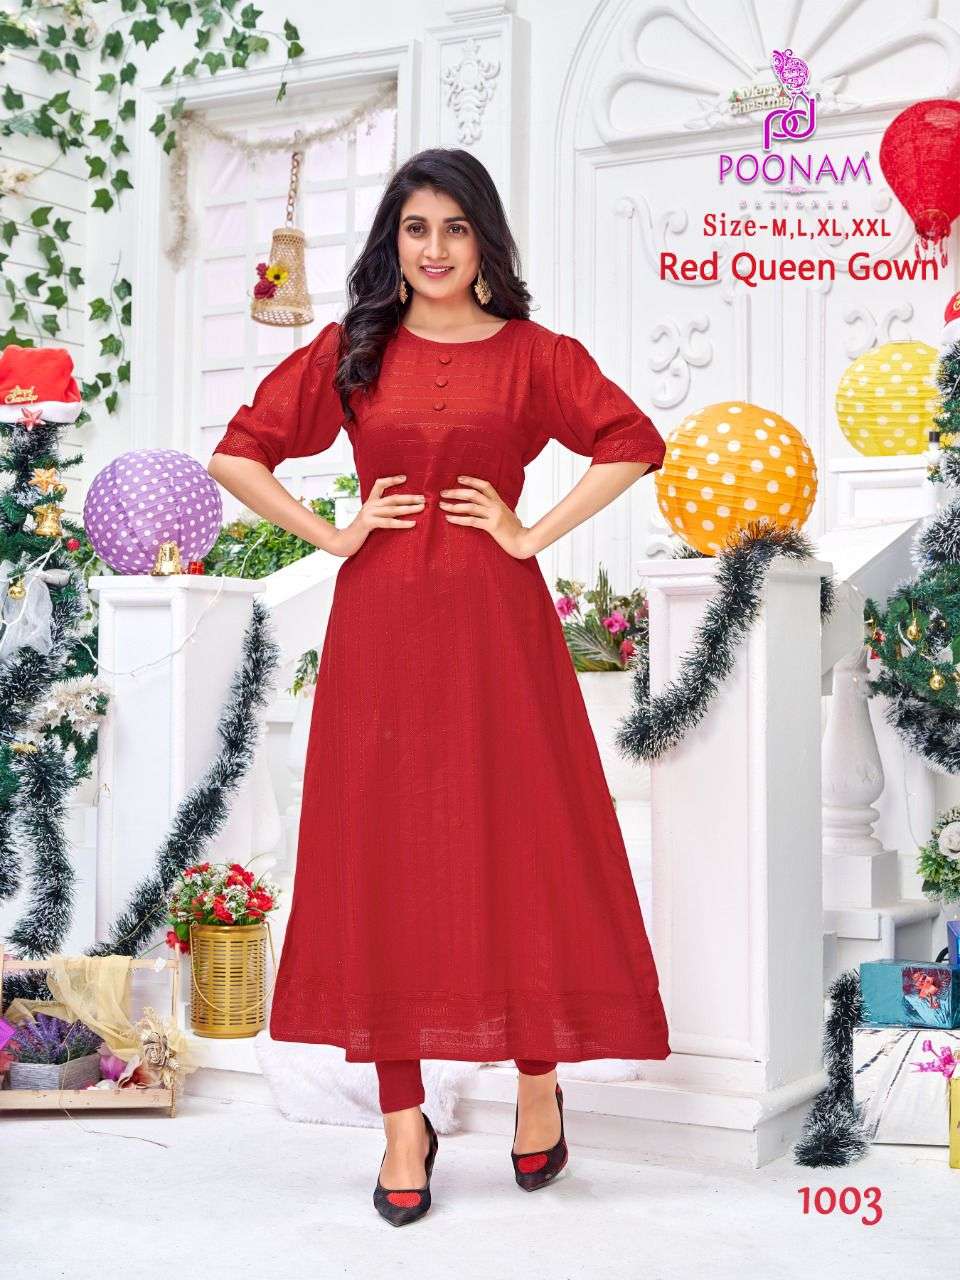 BEST SELLER - Girls Long Ruffle Holiday/Christmas Dresses - Red Points